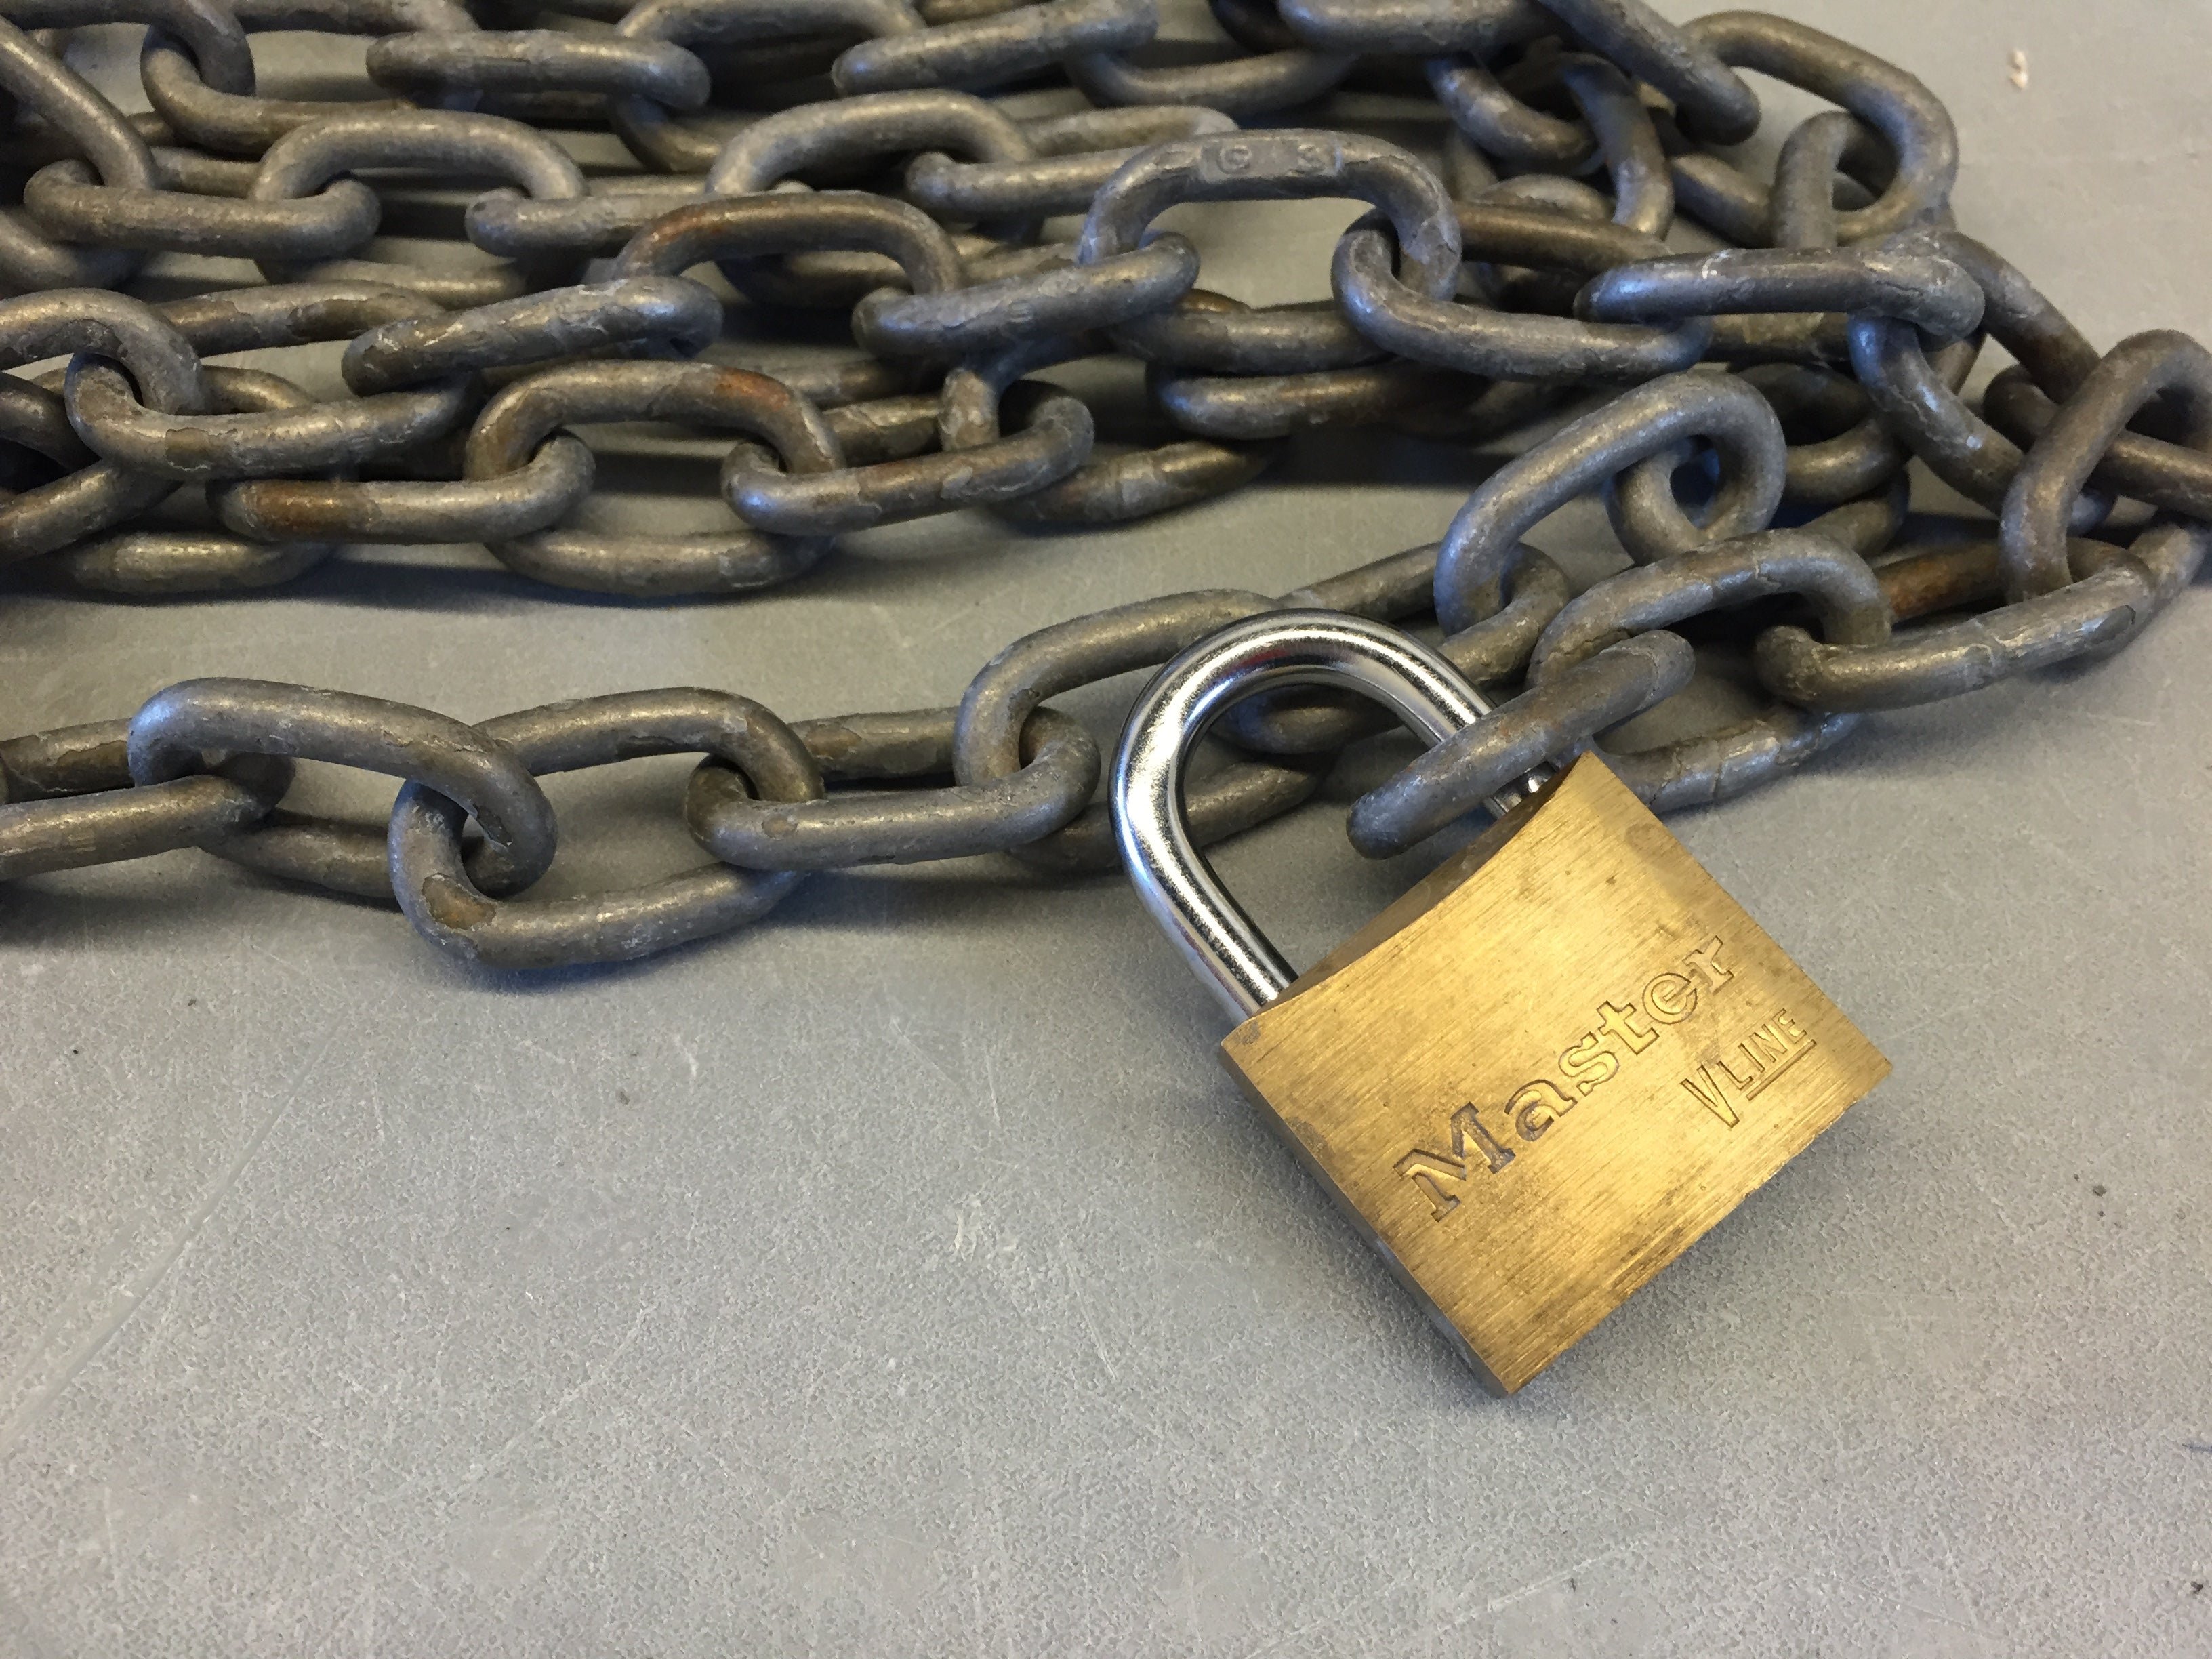 a gold Master Lock padlock attached to a coiled steel chain